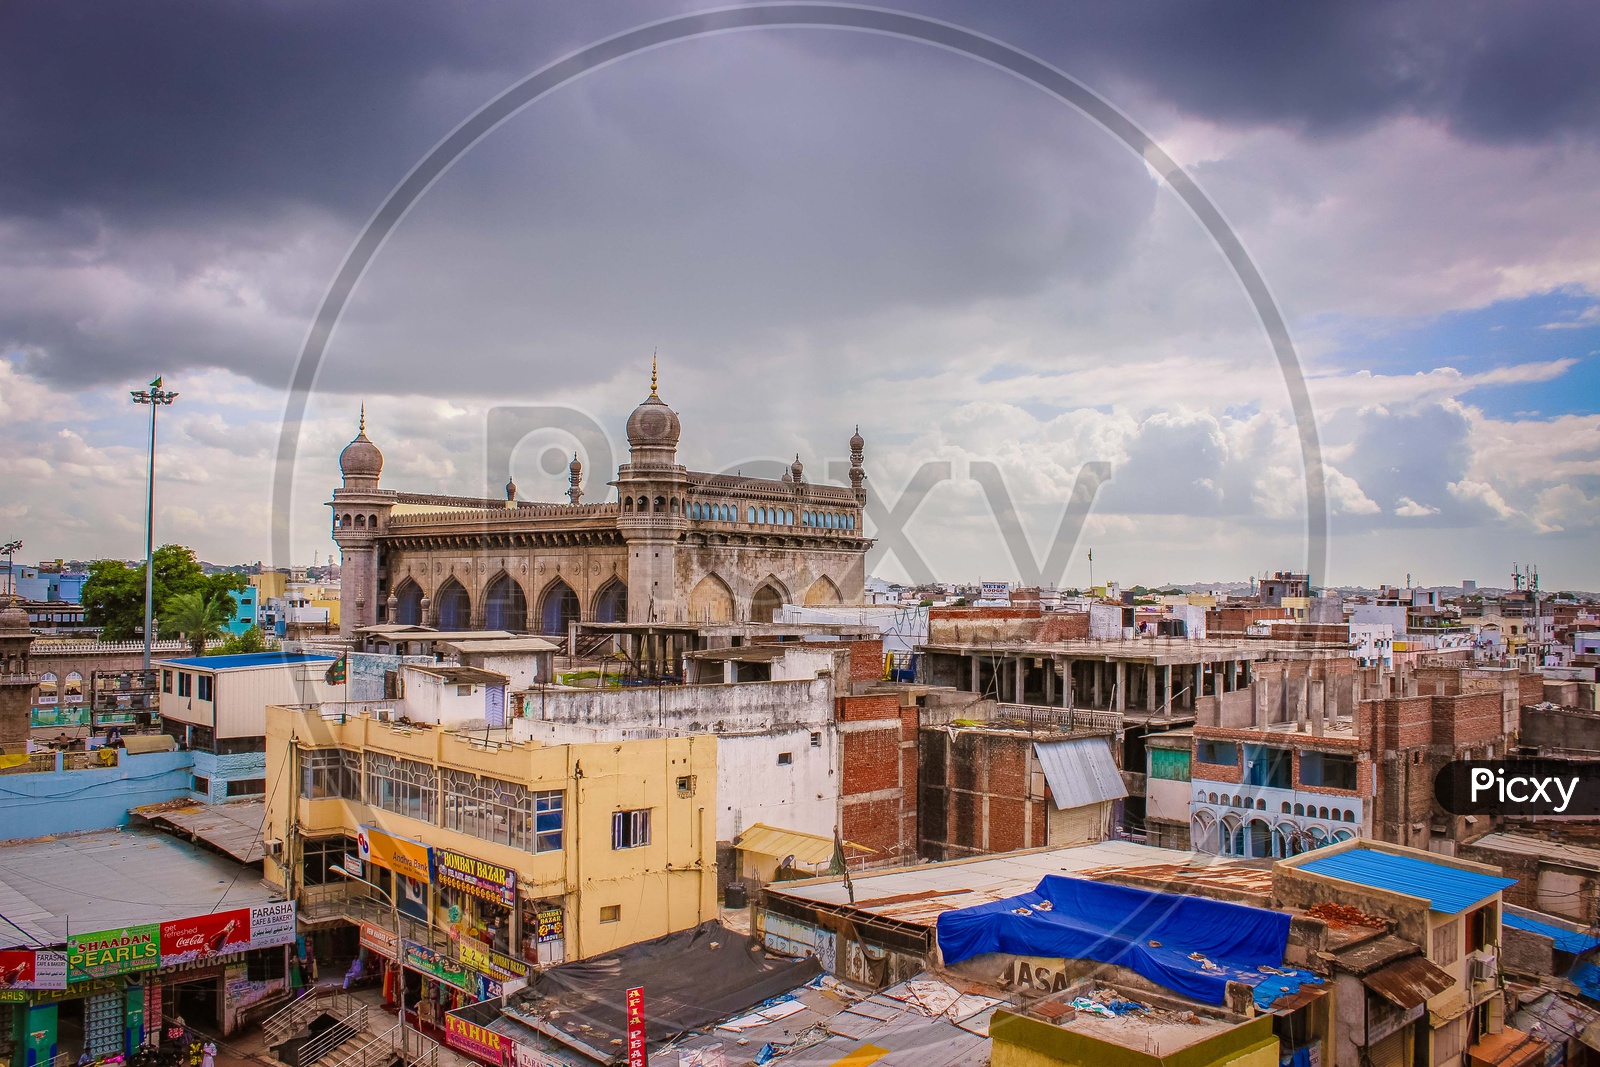 Landscape of Mecca Masjid during daylight covered with dark clouds